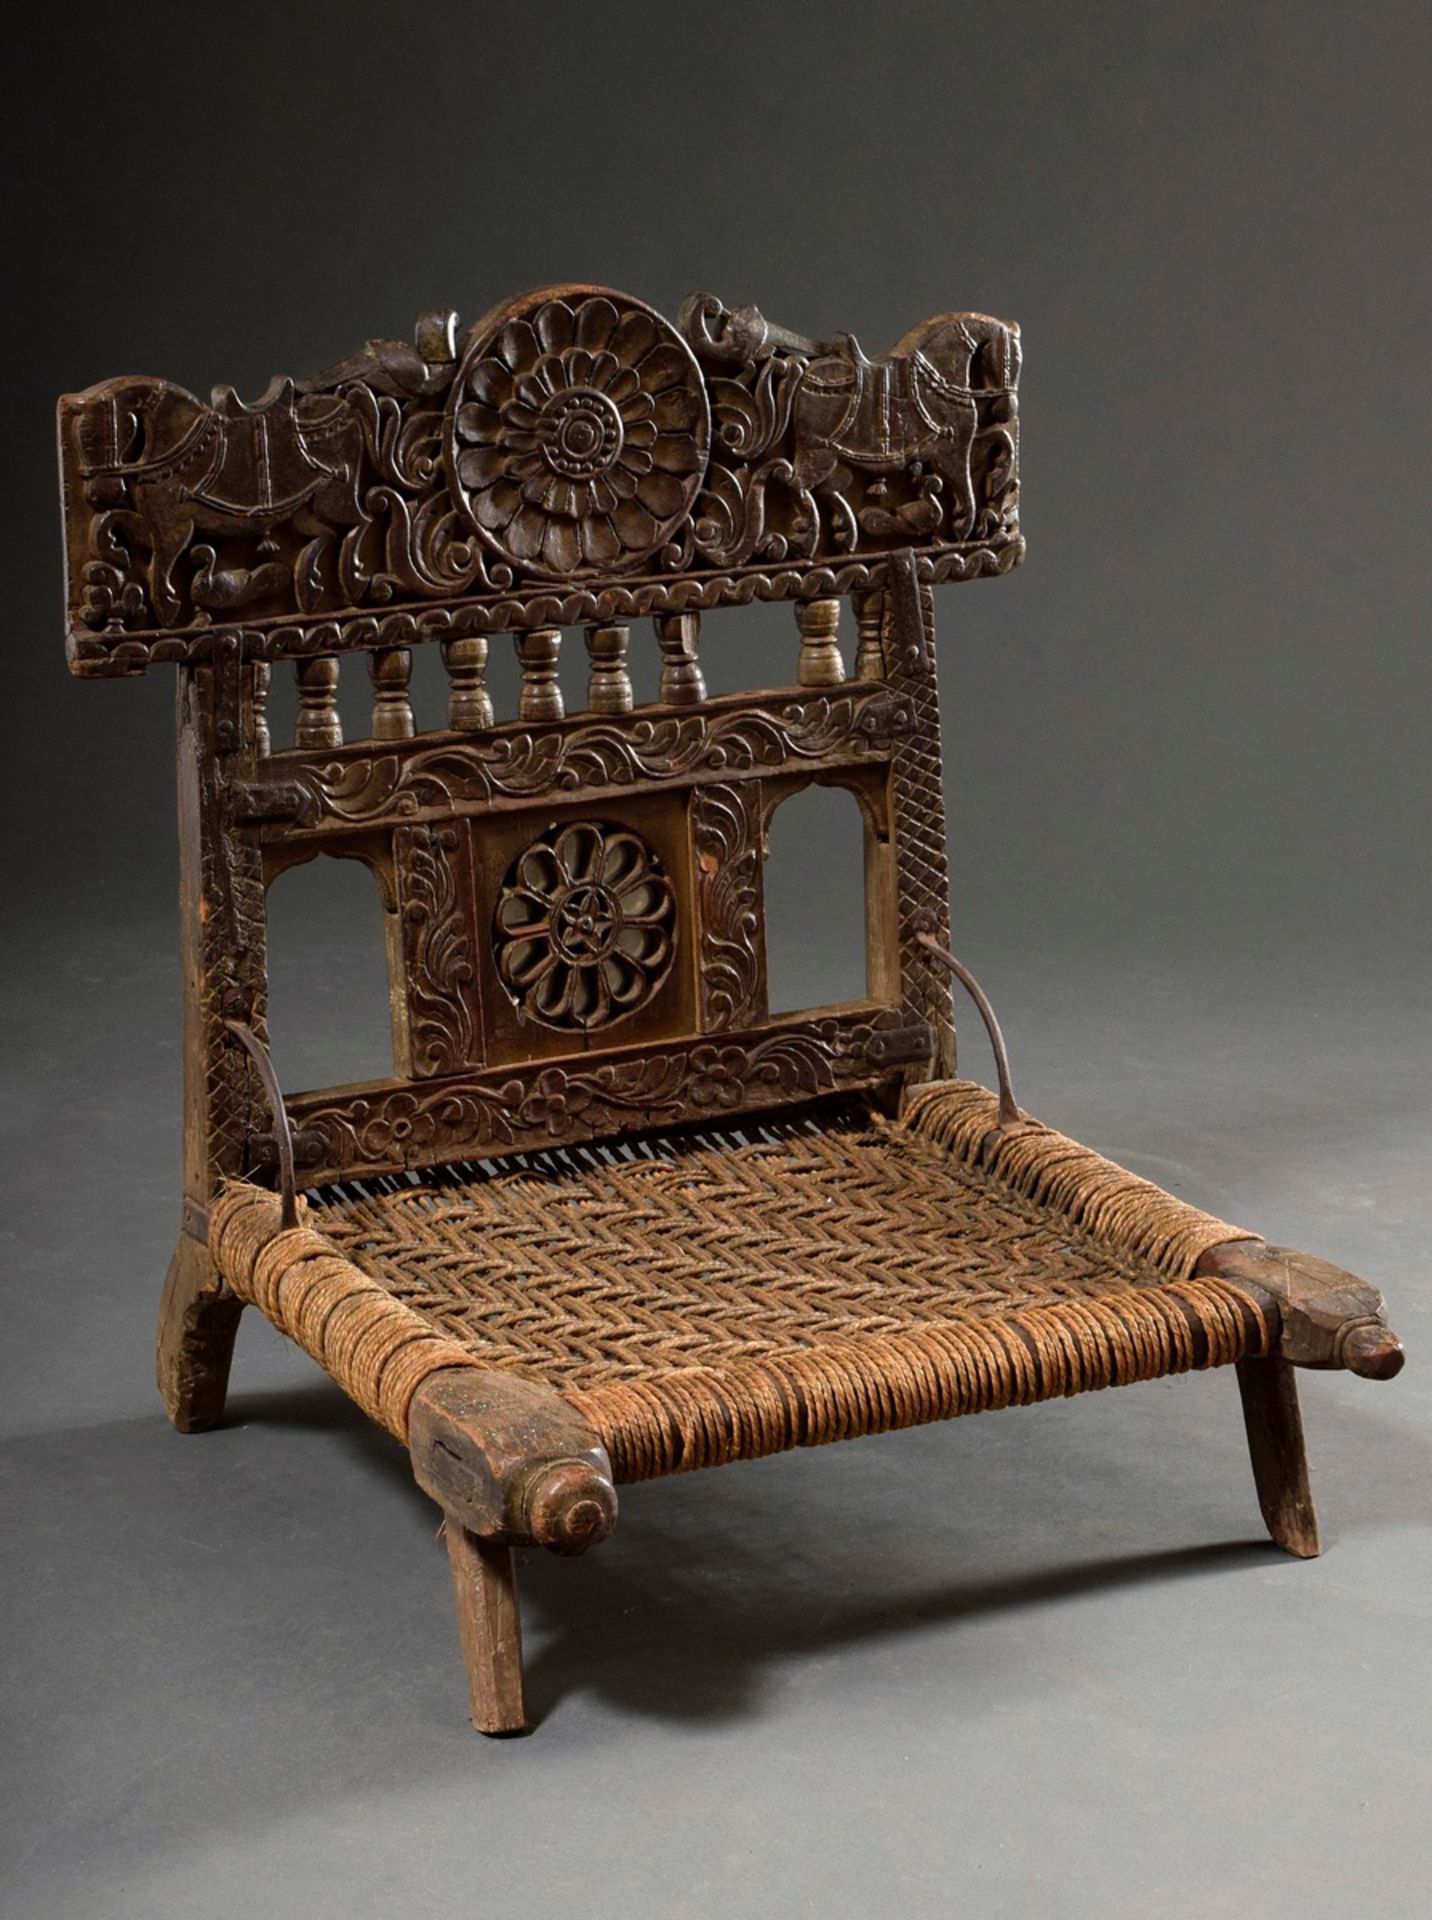 Indian wedding chair with richly carved frame "horses, peacocks and rosettes", around 1900, wood wi